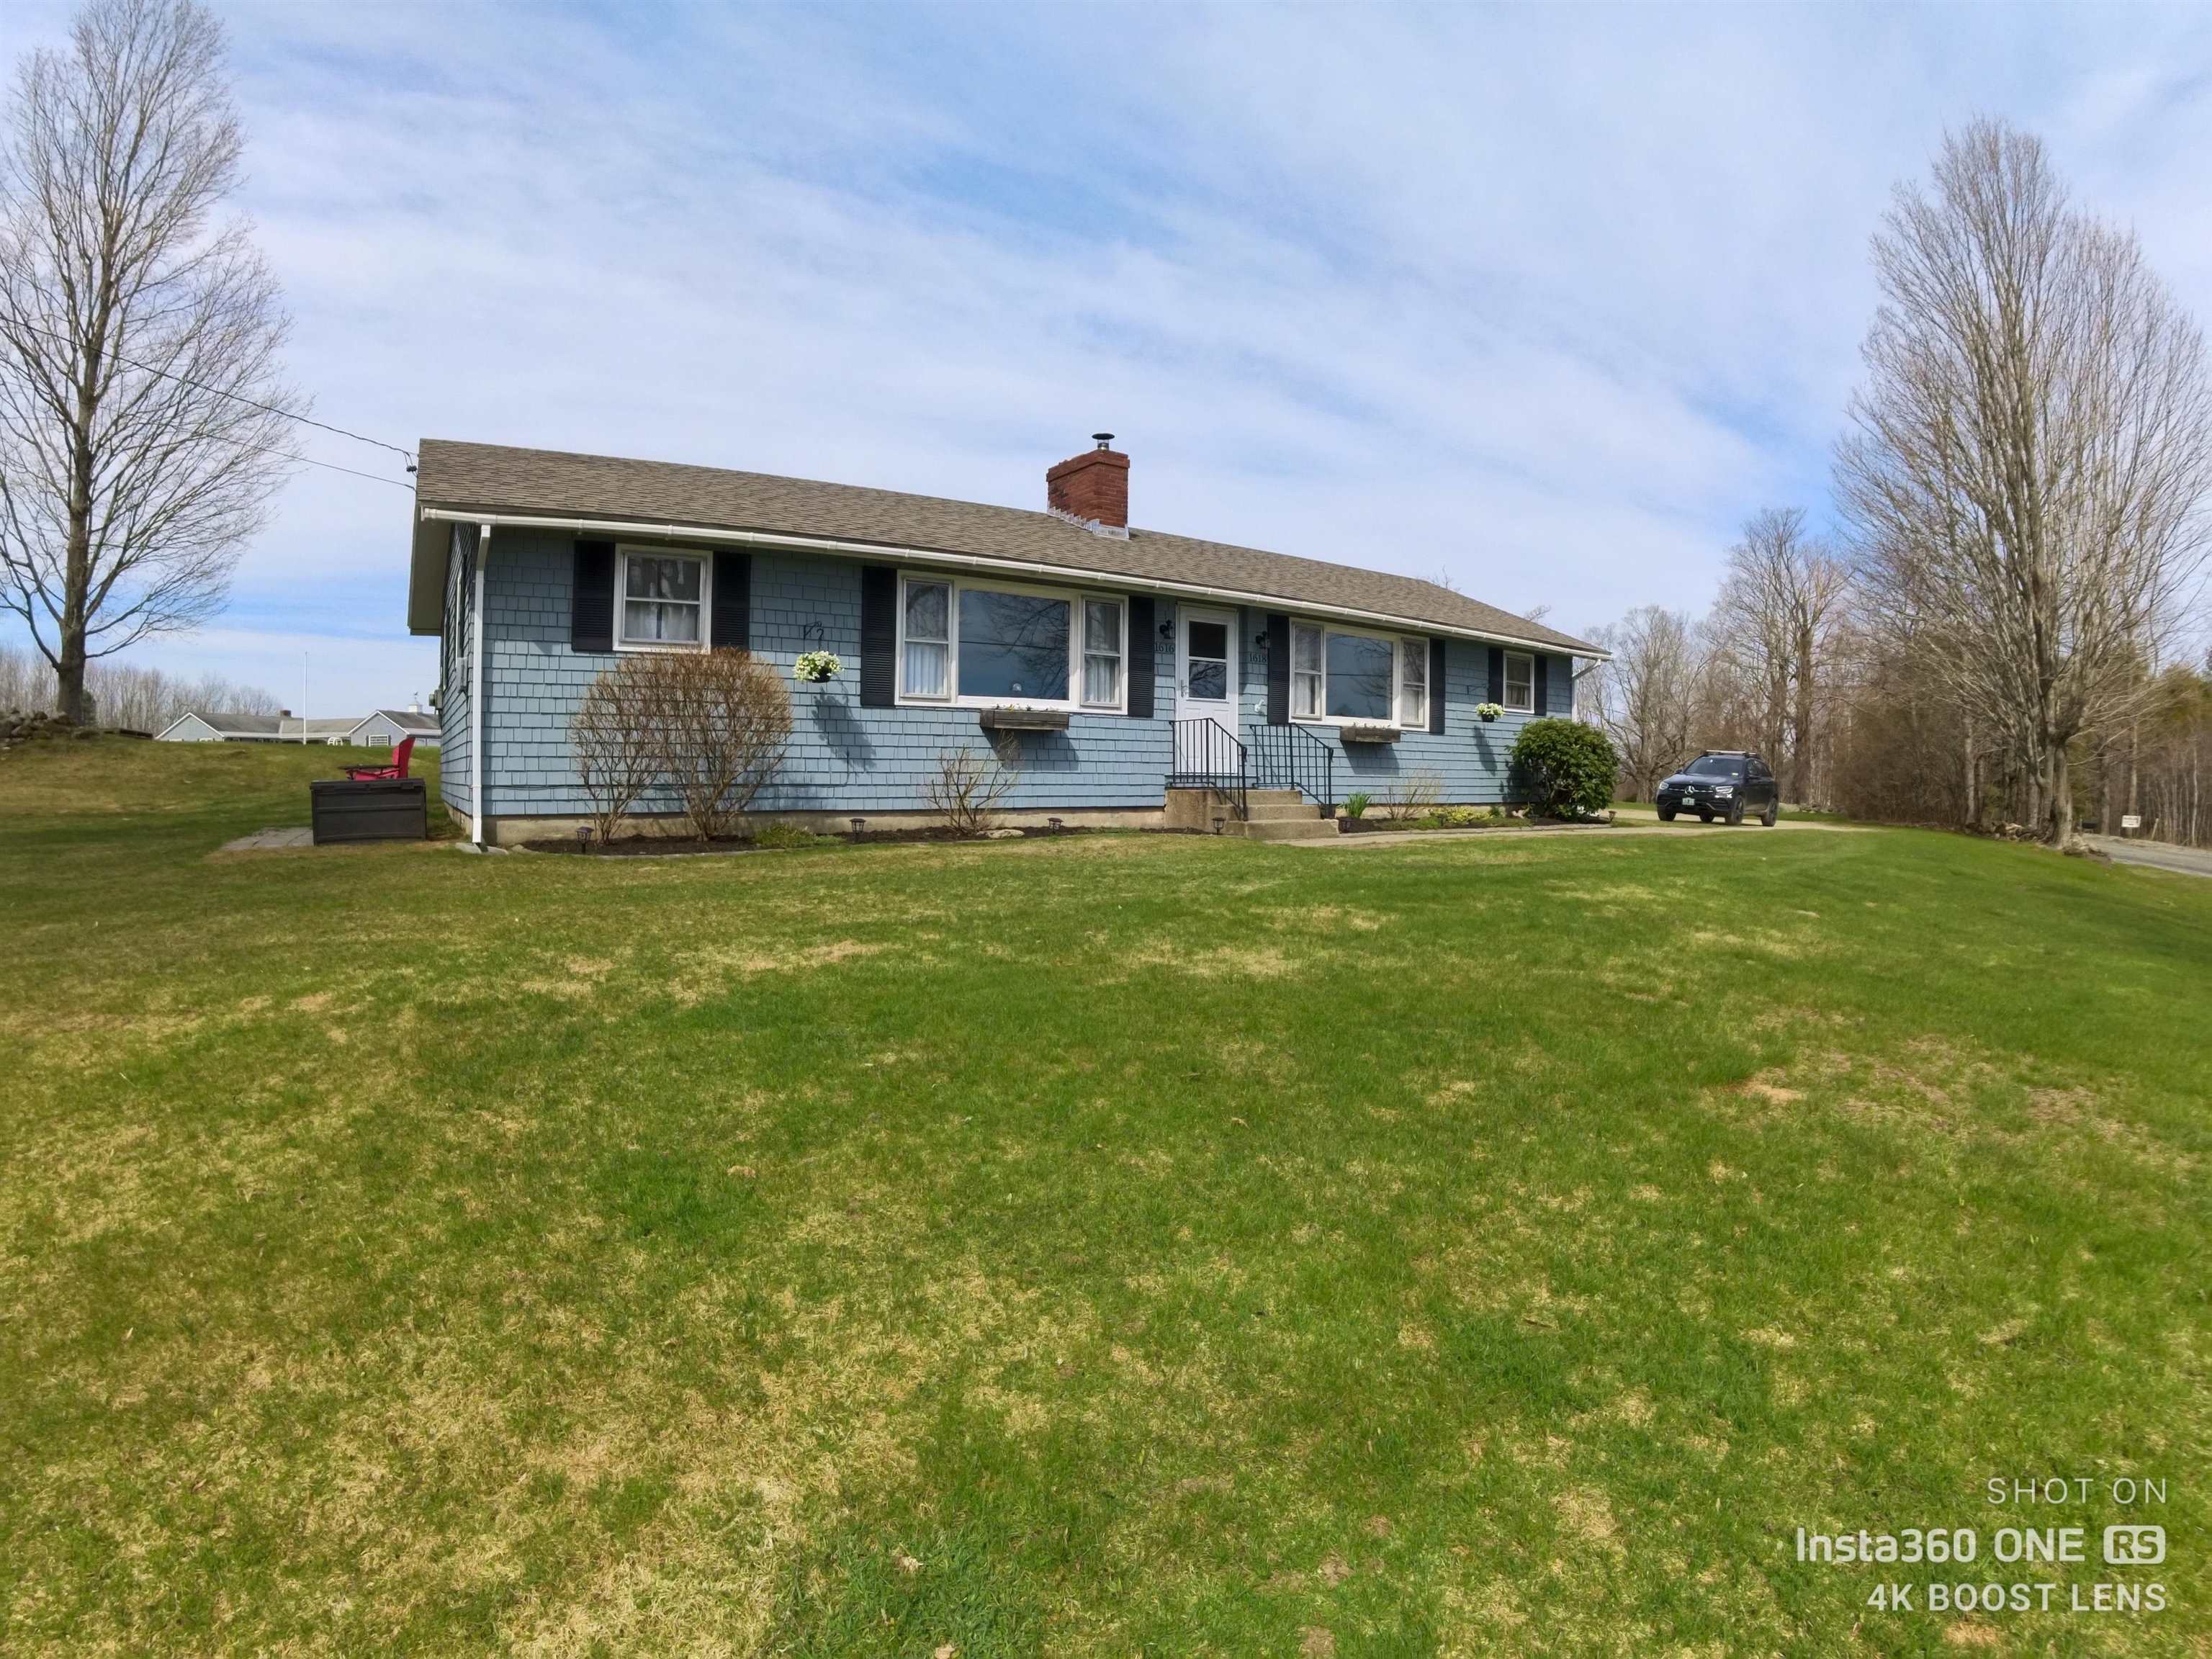 WEATHERSFIELD VT Homes for sale